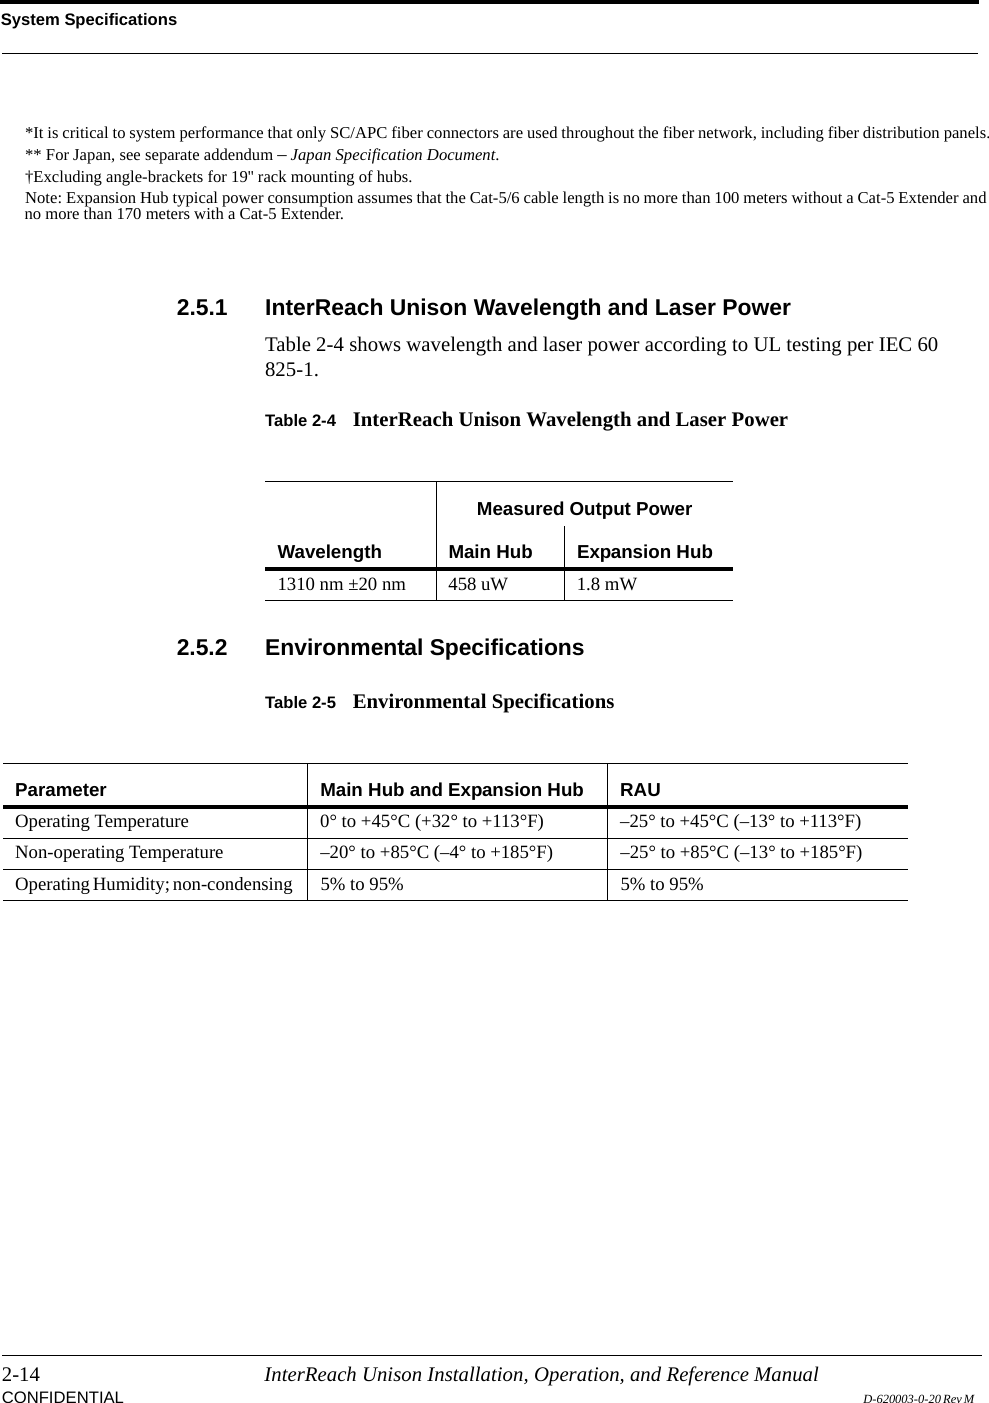 System Specifications2-14 InterReach Unison Installation, Operation, and Reference ManualCONFIDENTIAL D-620003-0-20 Rev M 2.5.1 InterReach Unison Wavelength and Laser PowerTable 2-4 shows wavelength and laser power according to UL testing per IEC 60 825-1.Table 2-4 InterReach Unison Wavelength and Laser Power2.5.2 Environmental SpecificationsTable 2-5 Environmental Specifications*It is critical to system performance that only SC/APC fiber connectors are used throughout the fiber network, including fiber distribution panels.** For Japan, see separate addendum – Japan Specification Document.†Excluding angle-brackets for 19&apos;&apos; rack mounting of hubs.Note: Expansion Hub typical power consumption assumes that the Cat-5/6 cable length is no more than 100 meters without a Cat-5 Extender and no more than 170 meters with a Cat-5 Extender.WavelengthMeasured Output PowerMain Hub Expansion Hub1310 nm ±20 nm 458 uW 1.8 mWParameter Main Hub and Expansion Hub RAUOperating Temperature  0° to +45°C (+32° to +113°F) –25° to +45°C (–13° to +113°F)Non-operating Temperature  –20° to +85°C (–4° to +185°F) –25° to +85°C (–13° to +185°F)Operating Humidity; non-condensing  5% to 95% 5% to 95%